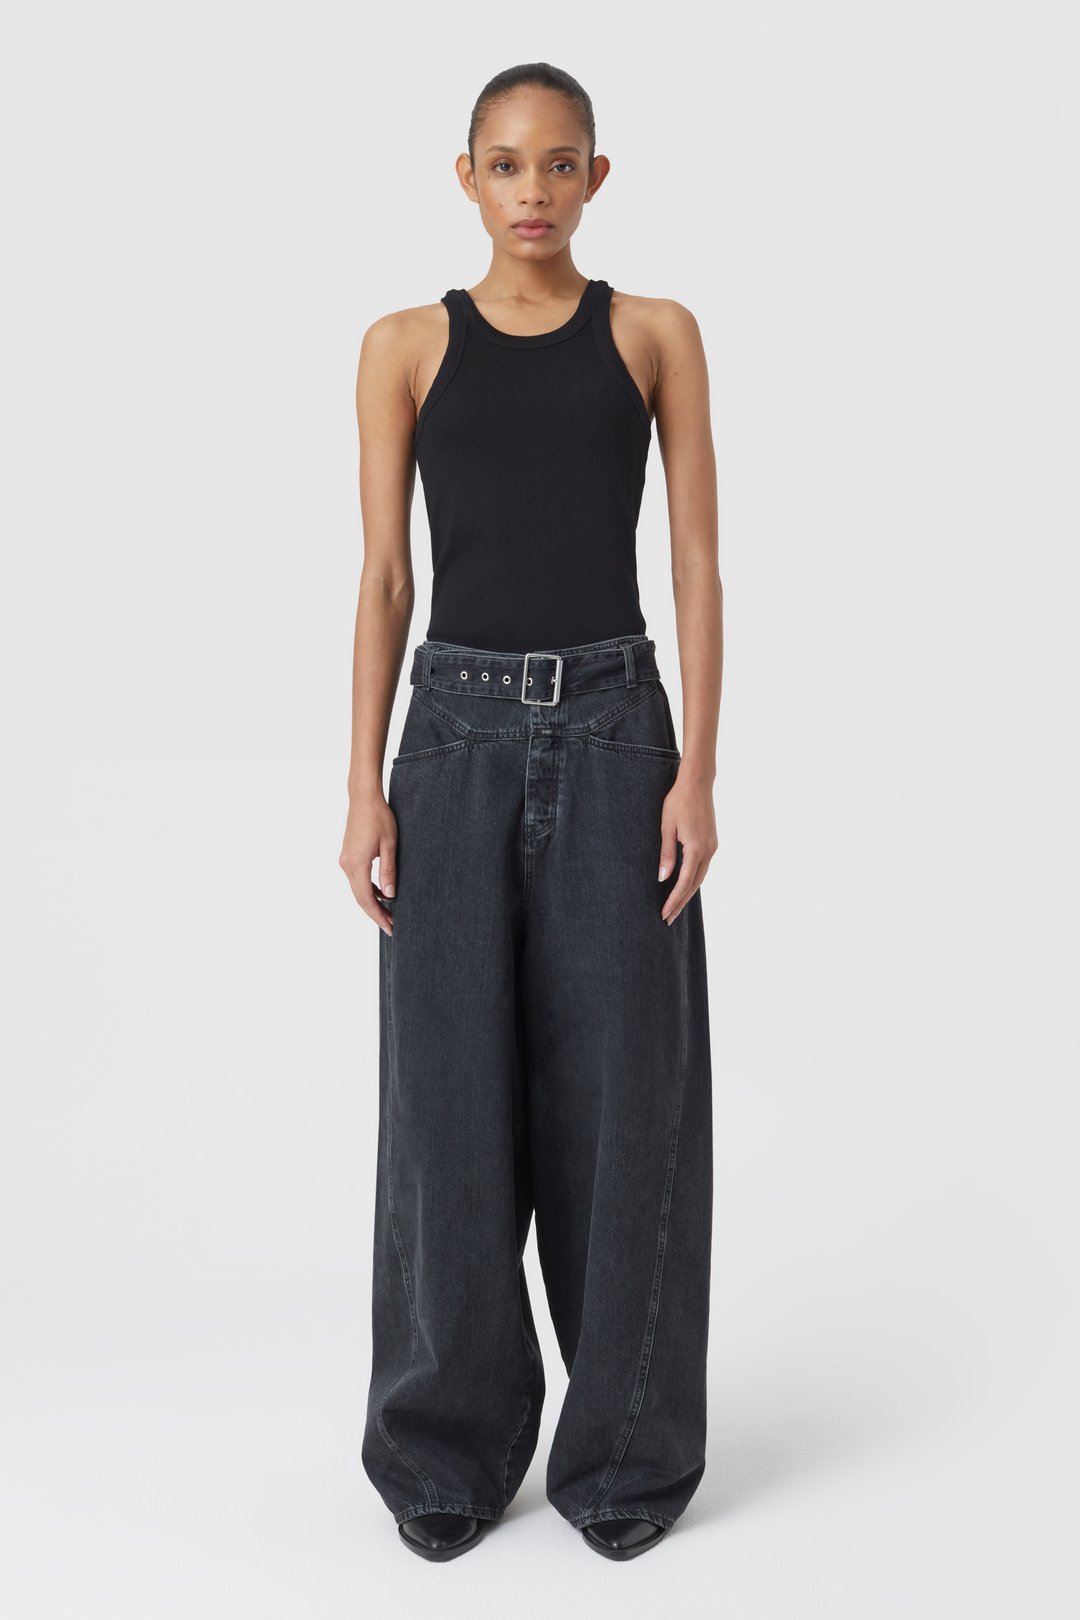 NAME BAGGY-X WIDE | - CLOSED JEANS STYLE